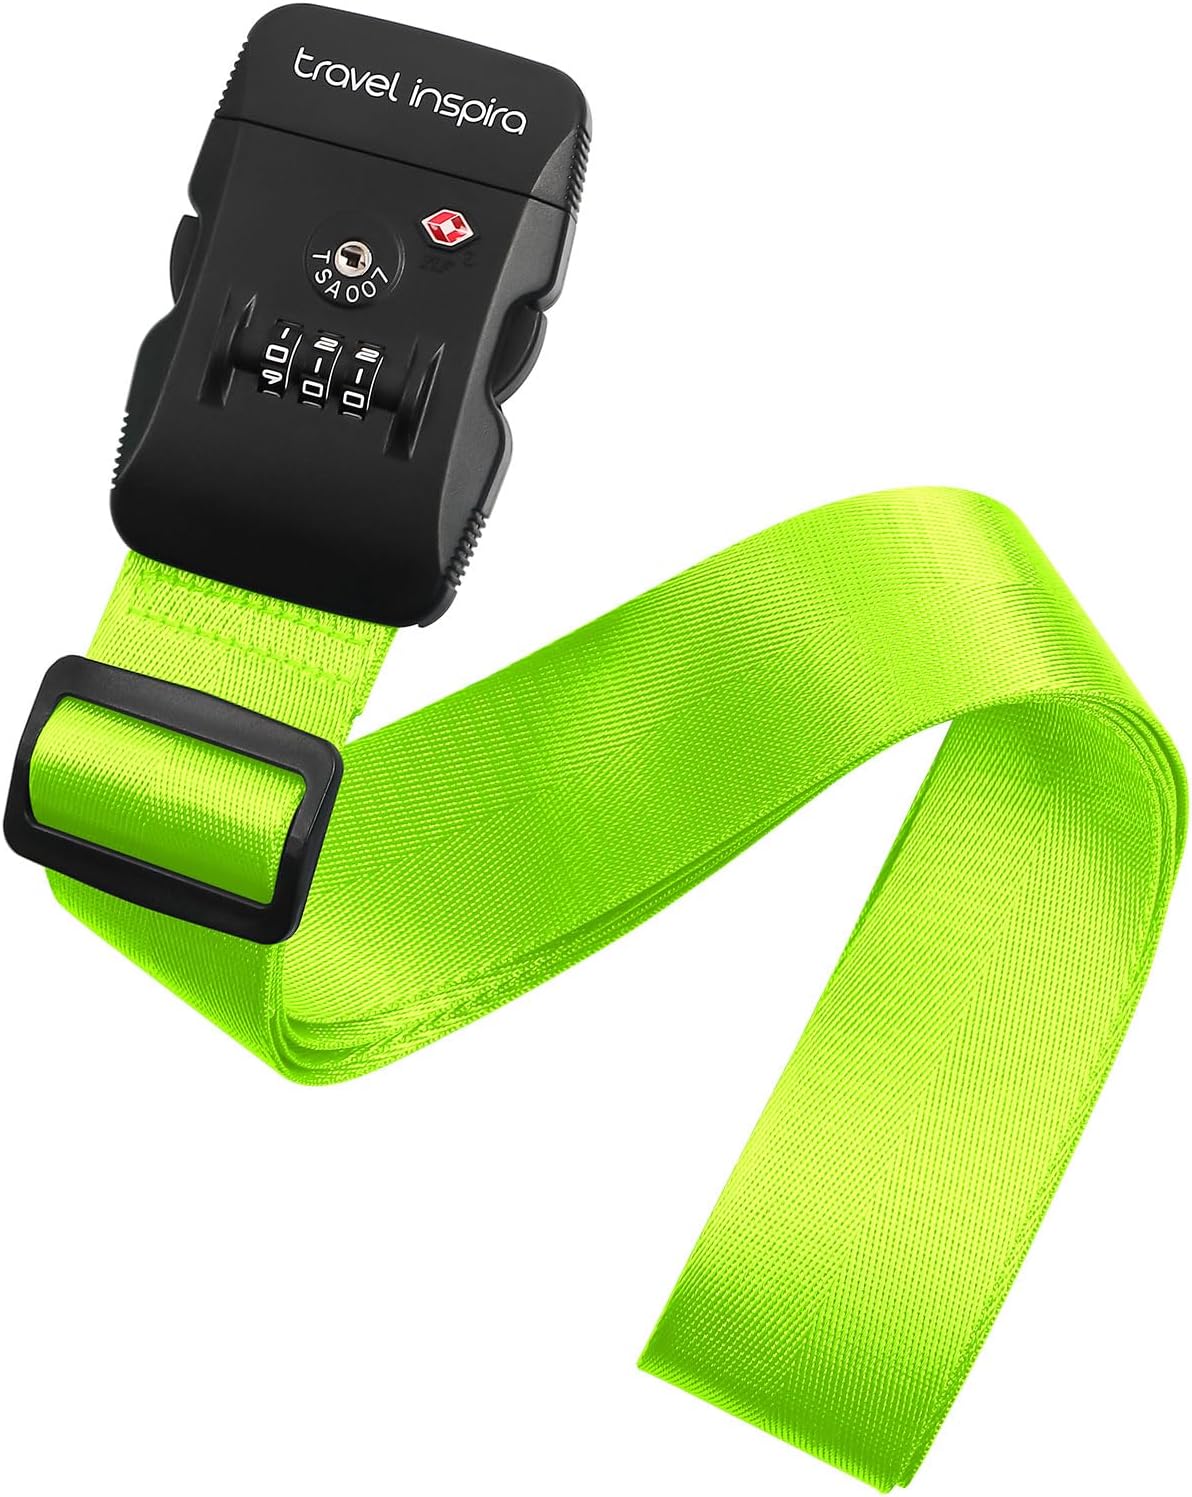 Travel Inspira Luggage Straps with TSA Combination Lock - Adjustable, Easy to Use, Protect Your Luggage, Fluorescent Green